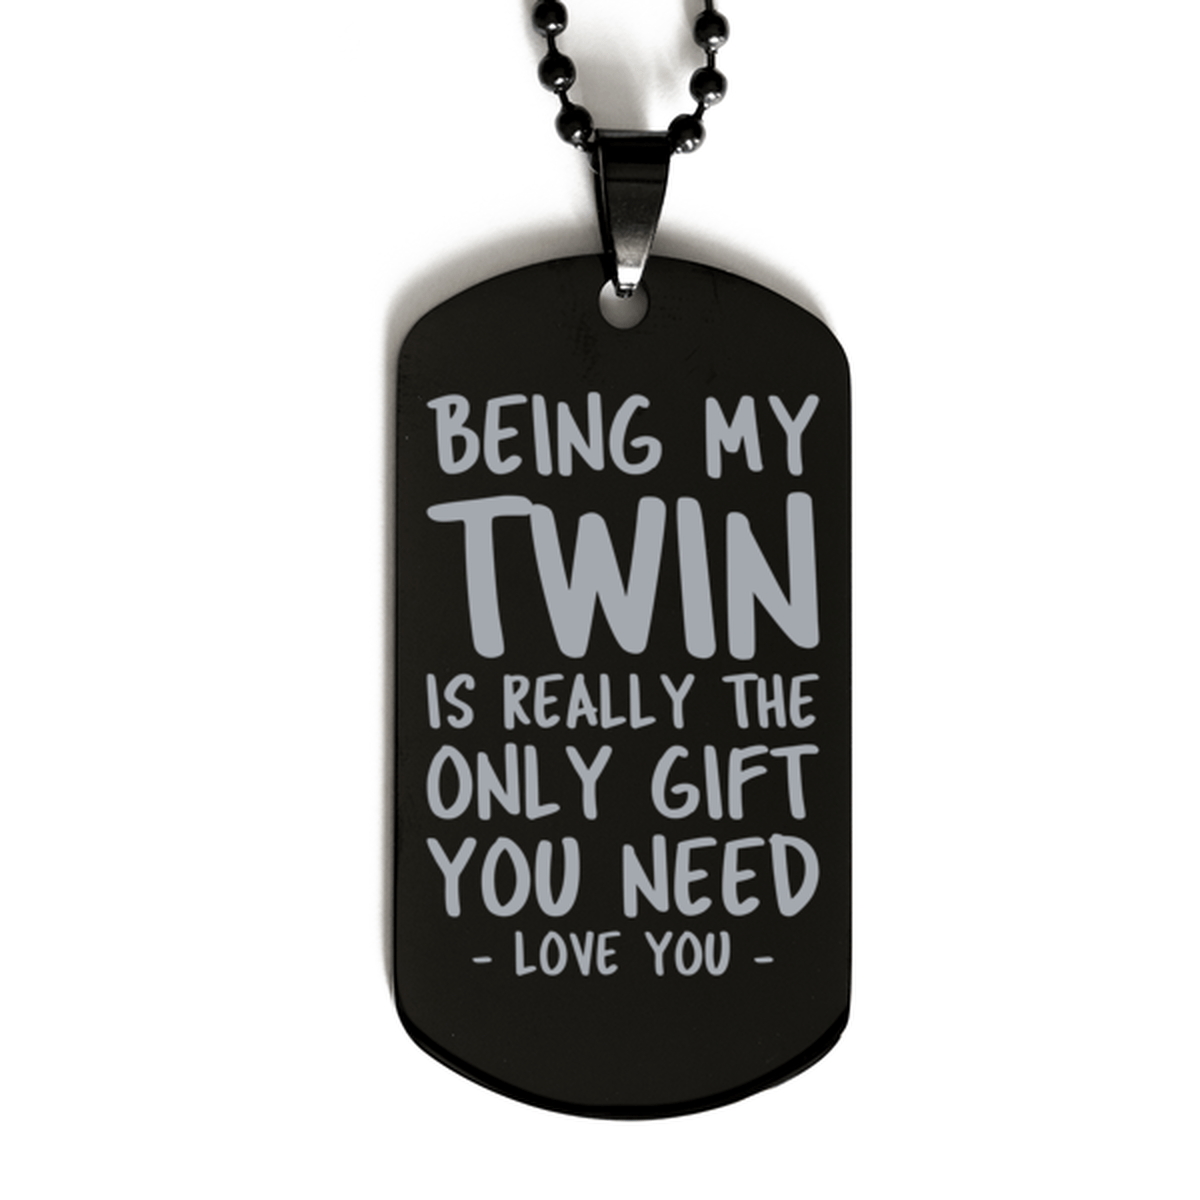 Funny Twin Black Dog Tag Necklace, Being My Twin Is Really the Only Gift You Need, Best Birthday Gifts for Twin